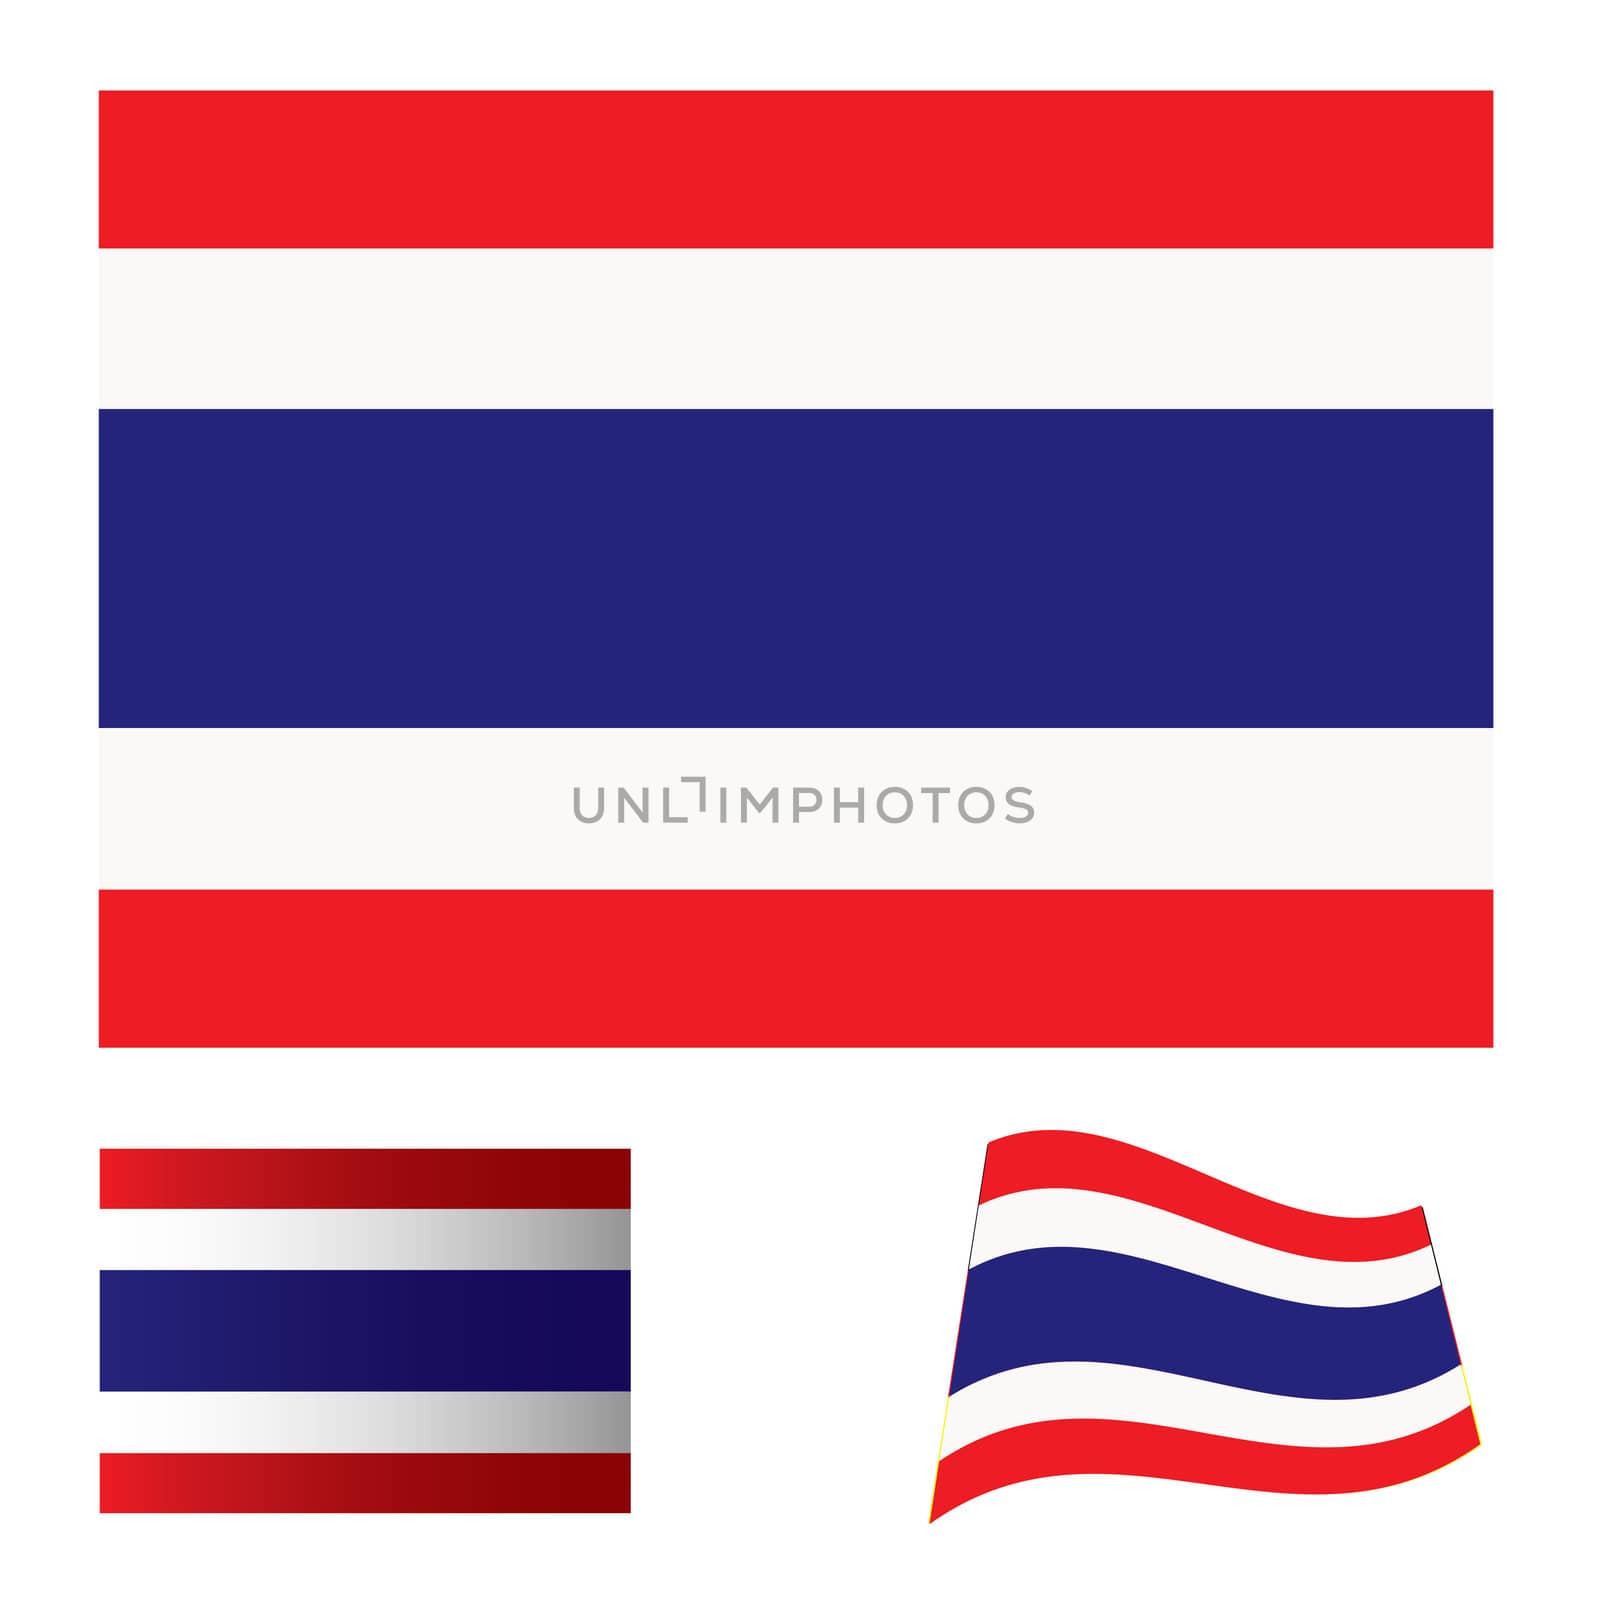 Illustrated collection of flag icon set for thailand